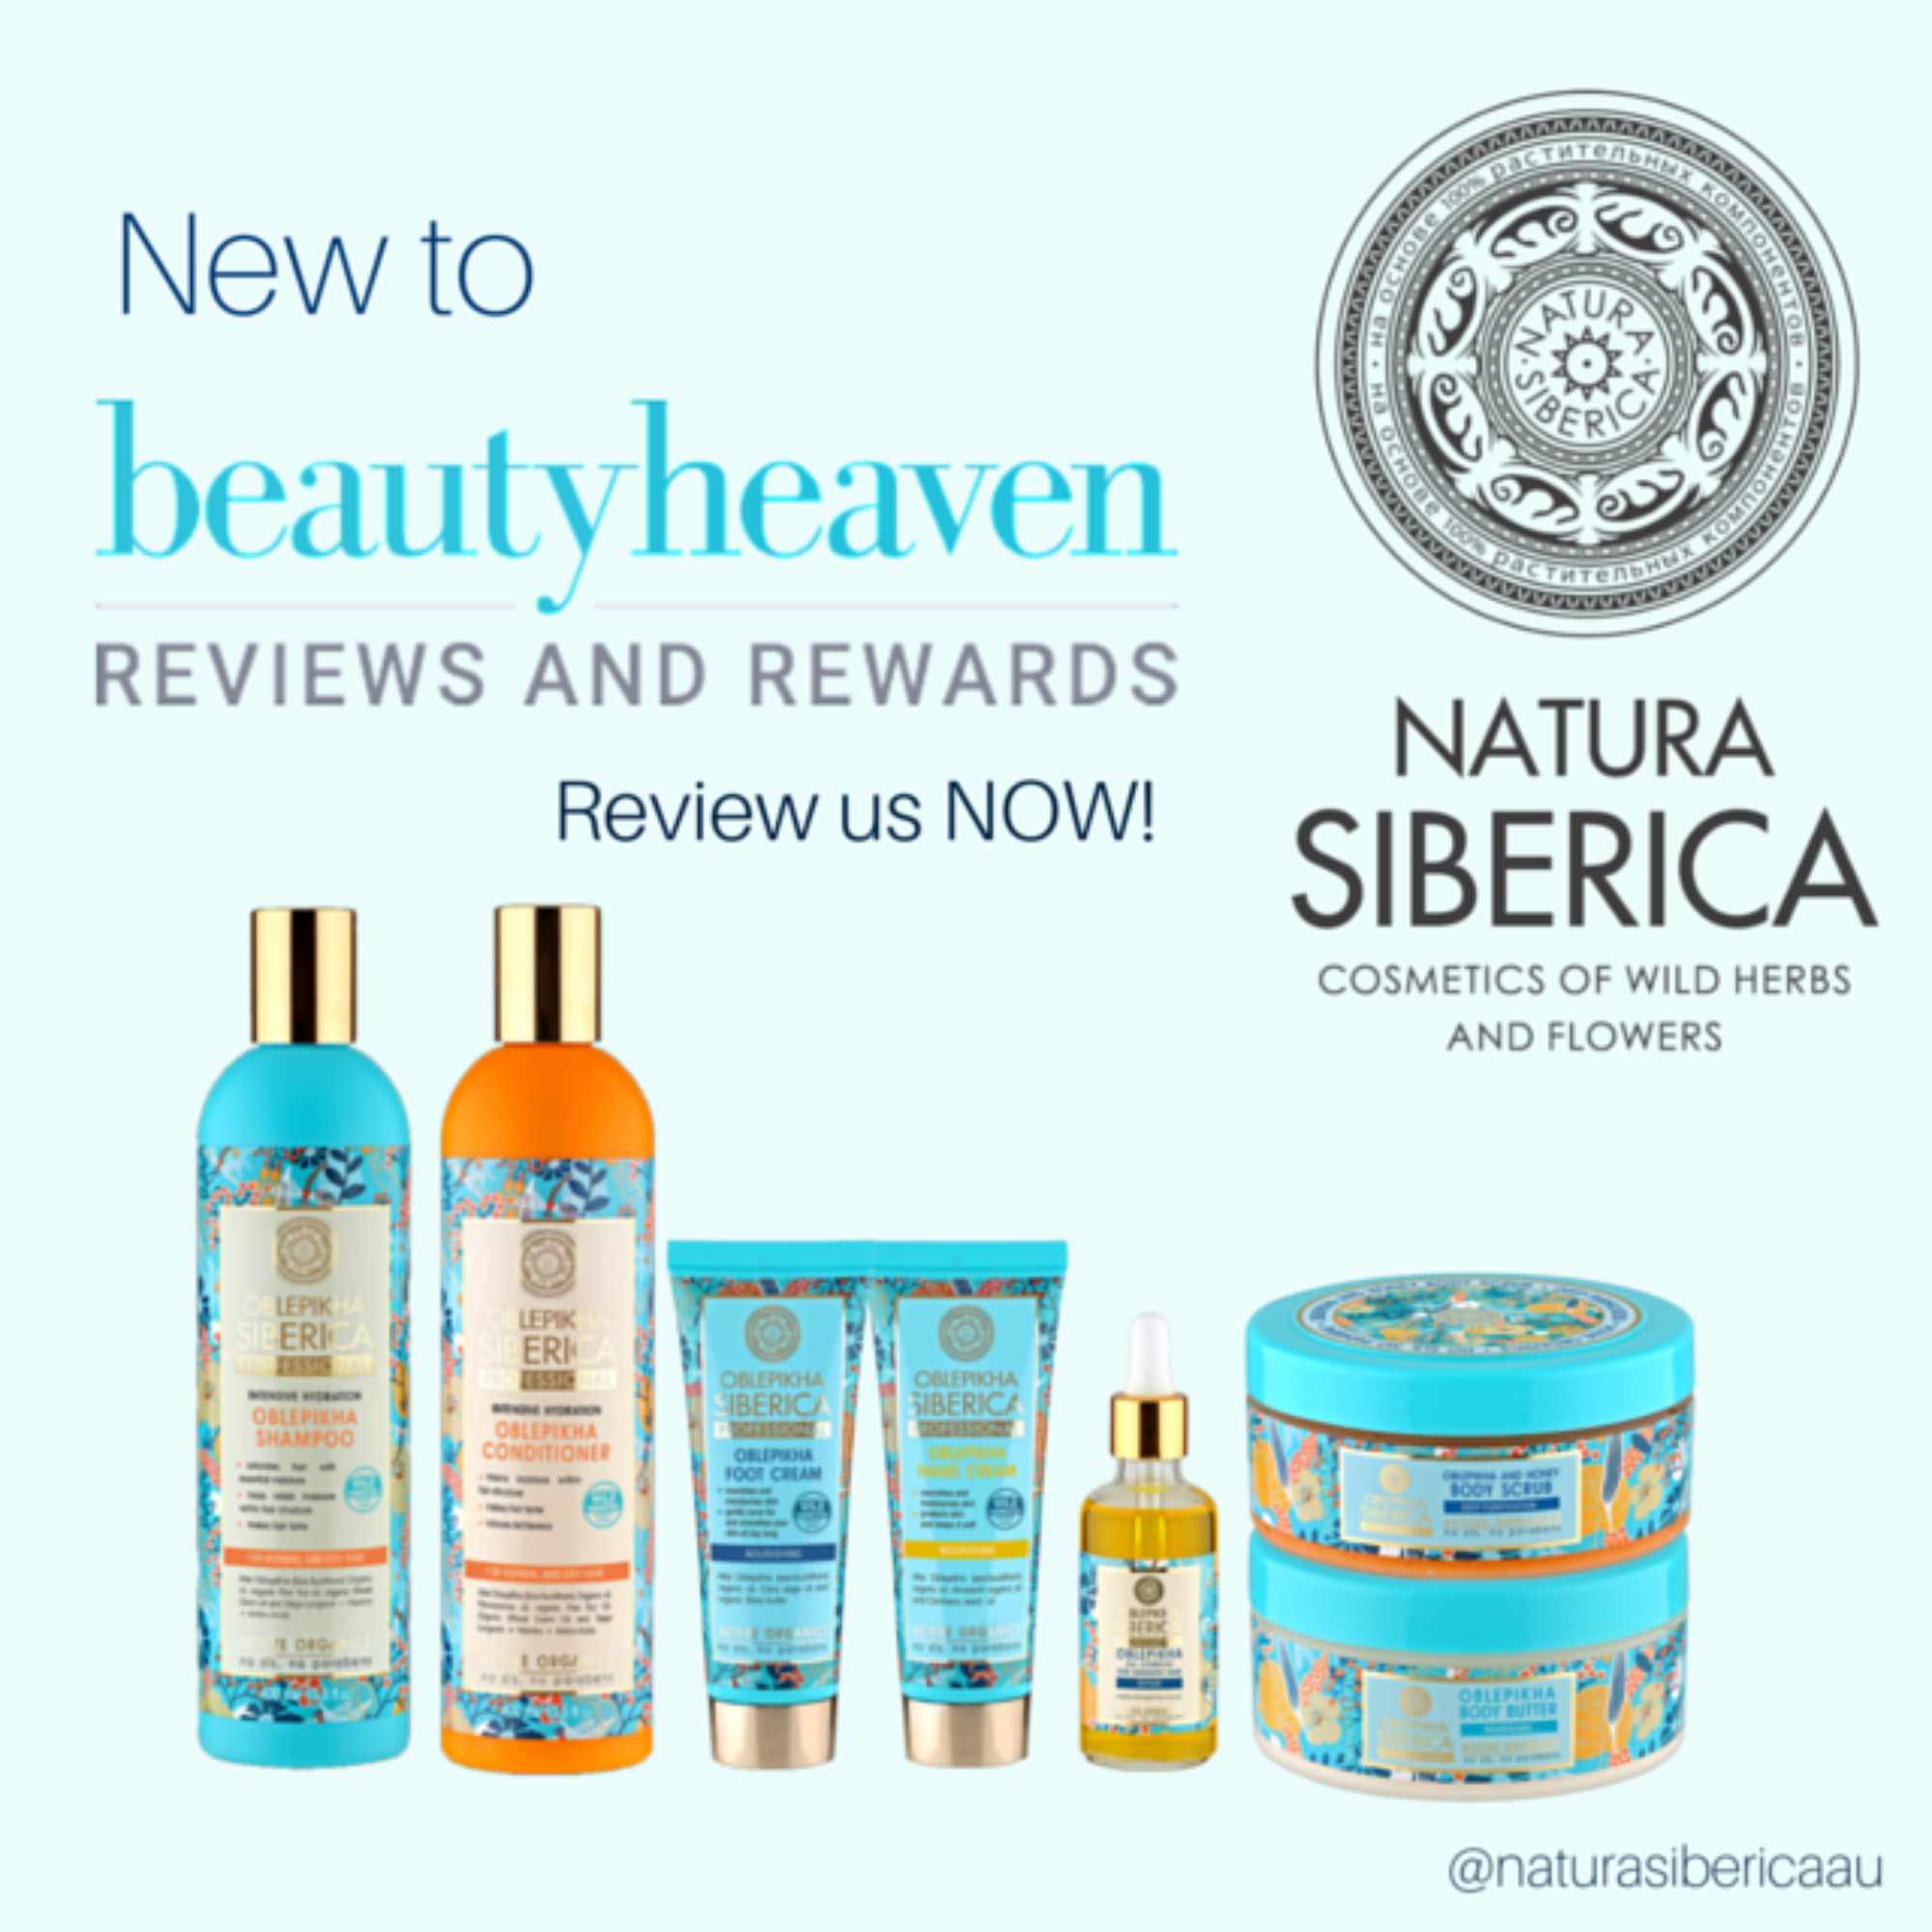 Review us NOW on beautyheaven